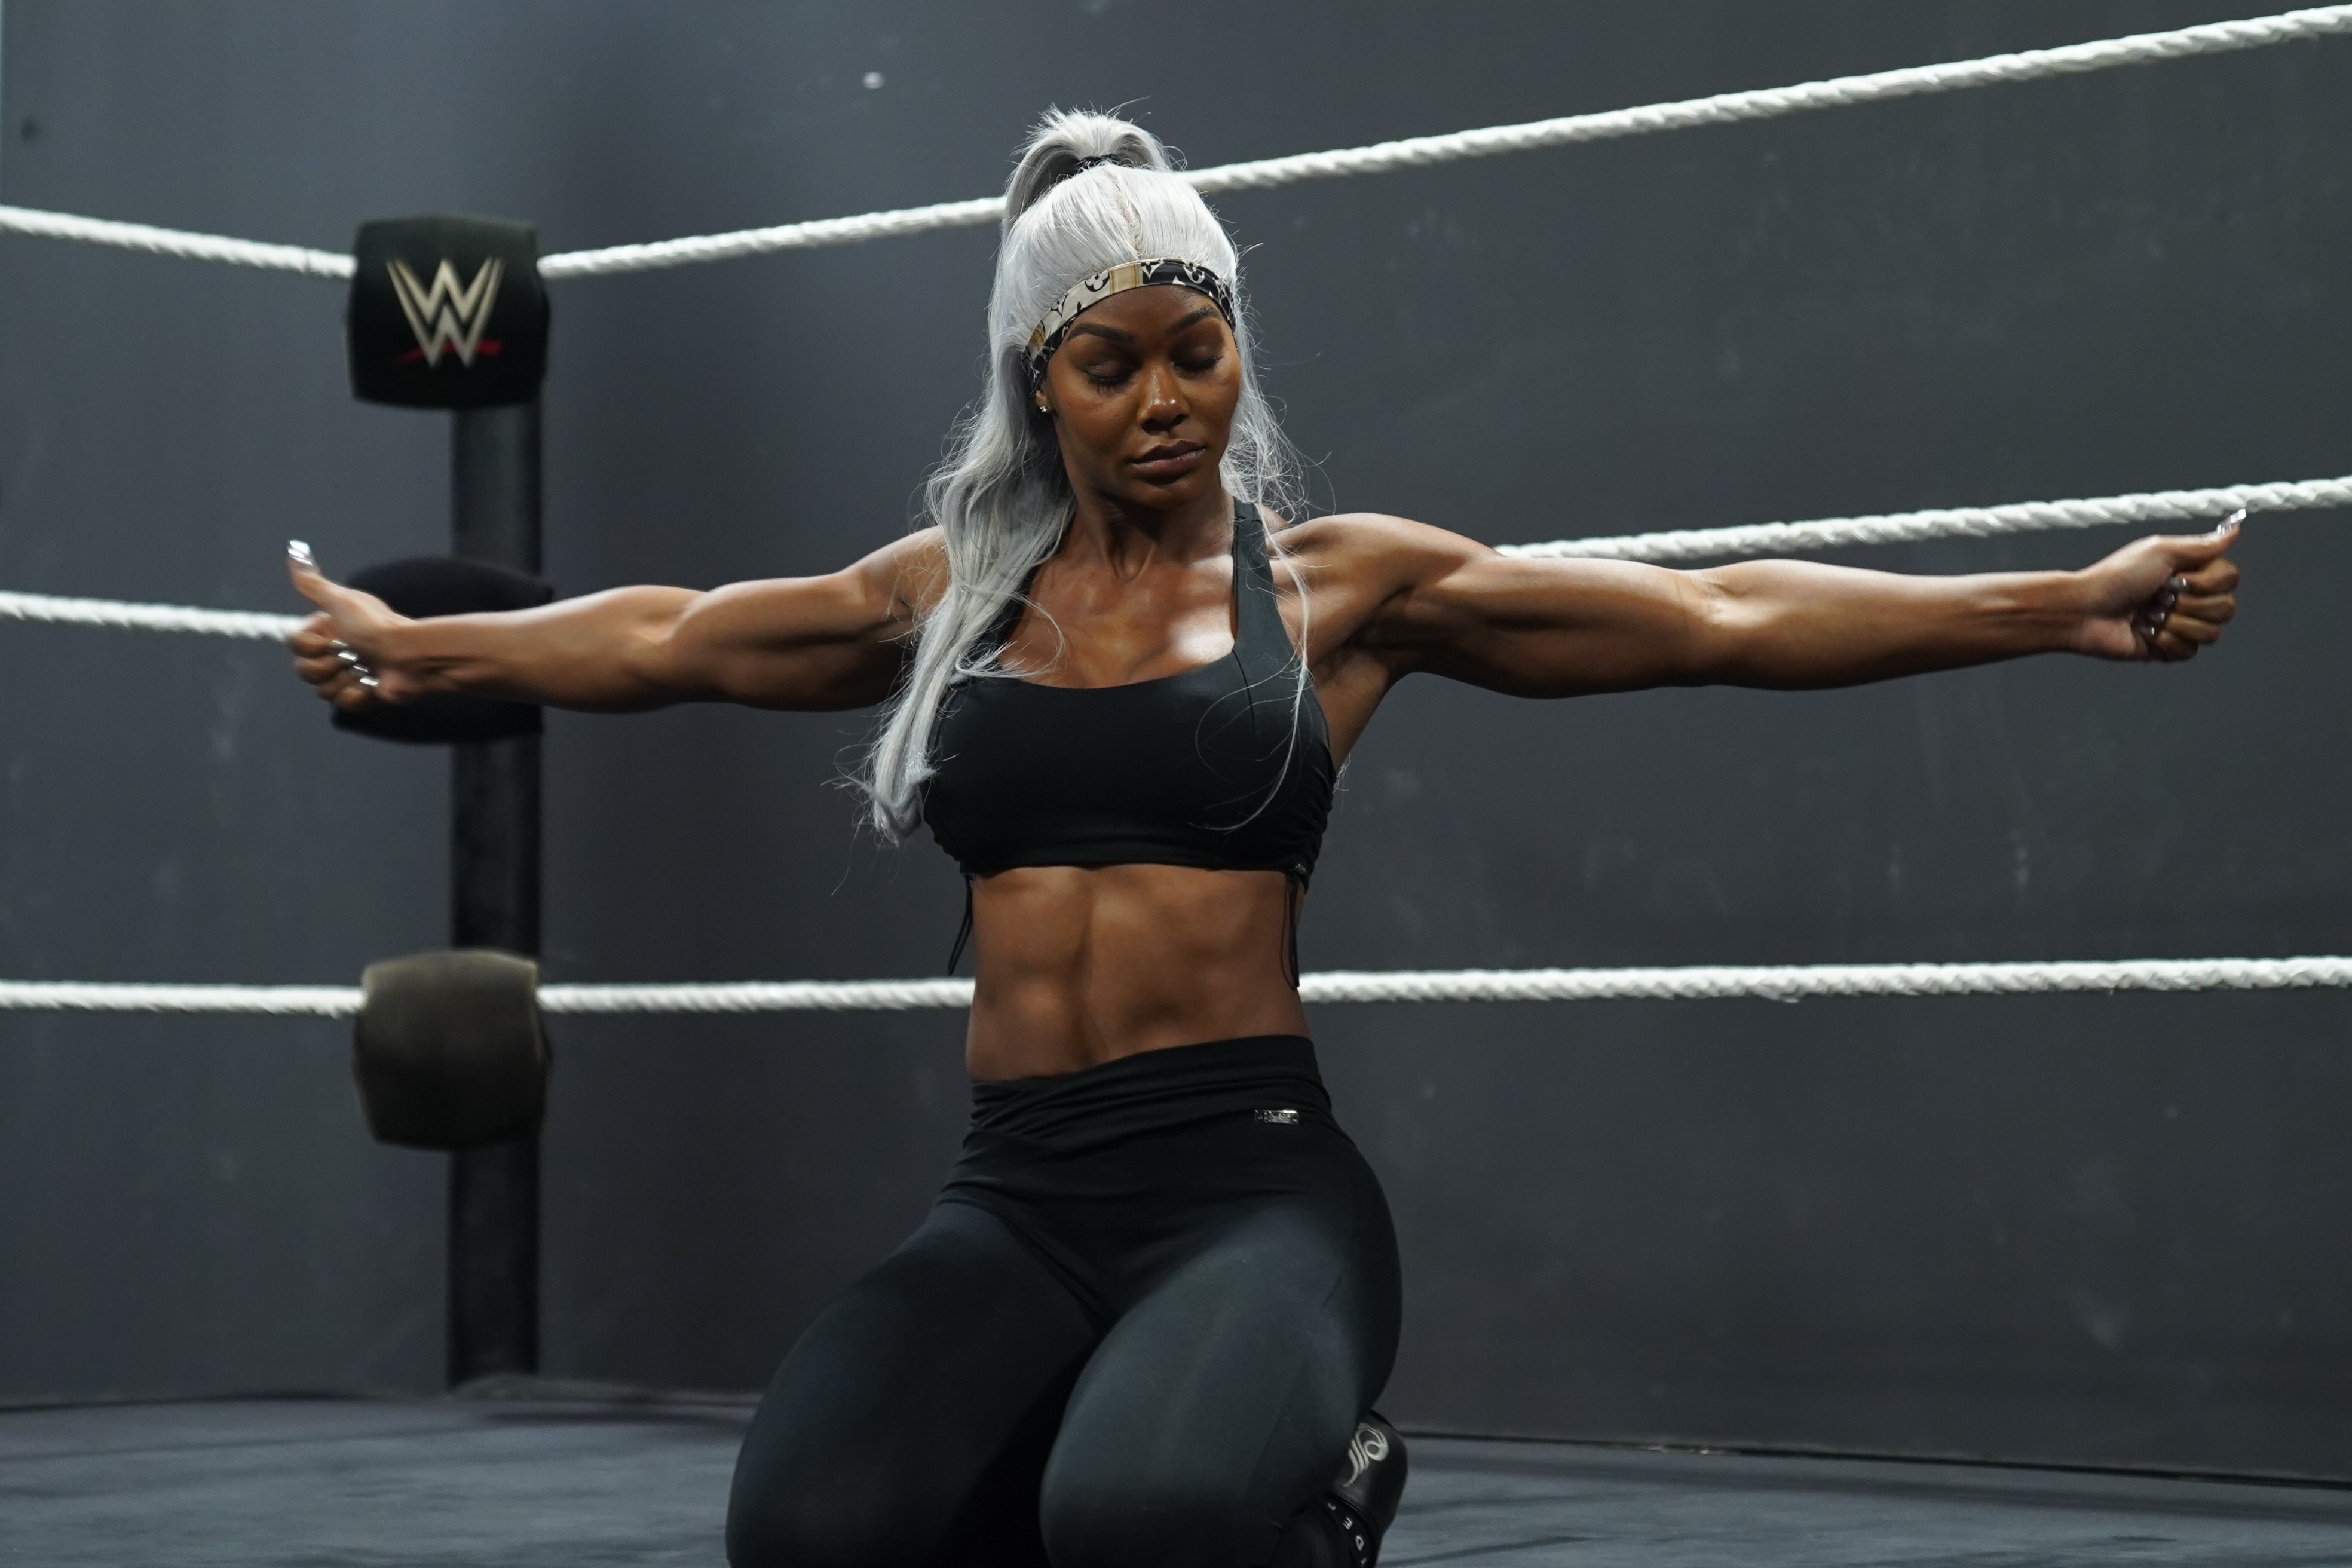 WWE: Jade Cargill looks ripped in behind the scenes training session